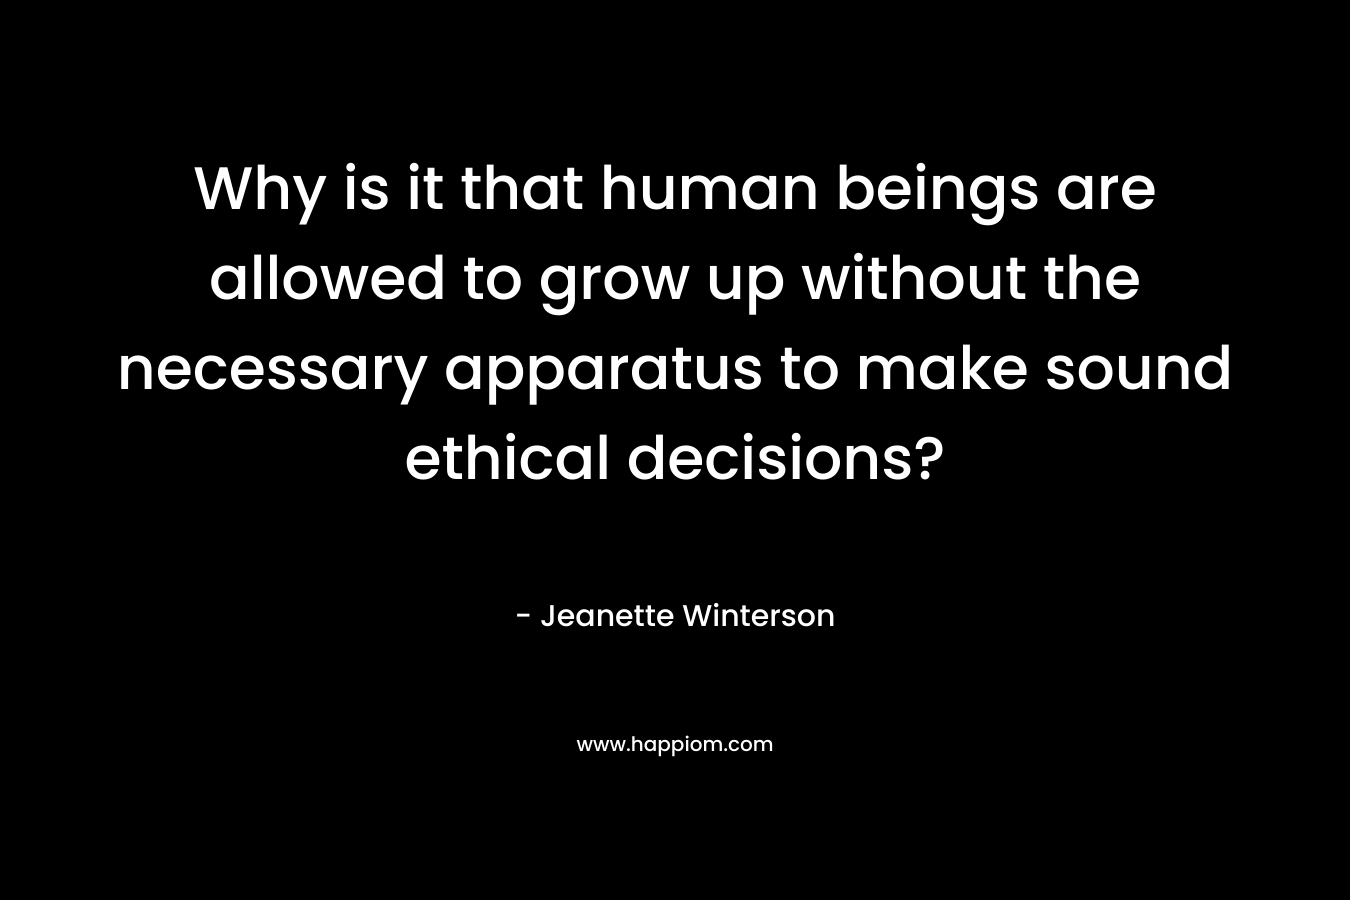 Why is it that human beings are allowed to grow up without the necessary apparatus to make sound ethical decisions?